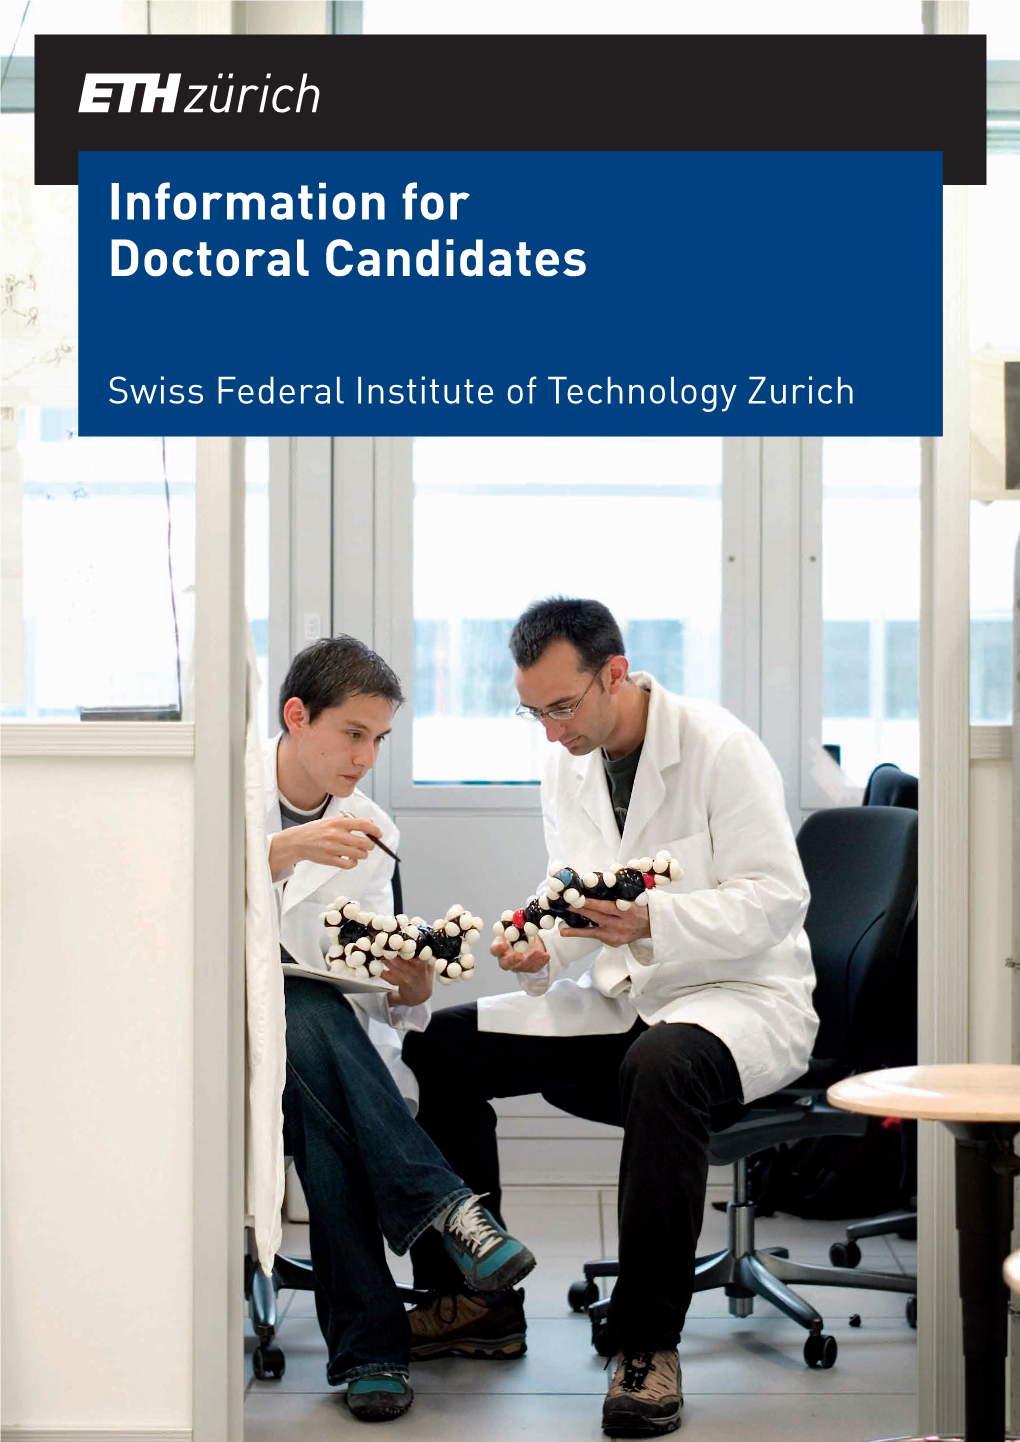 Information for Doctoral Candidates